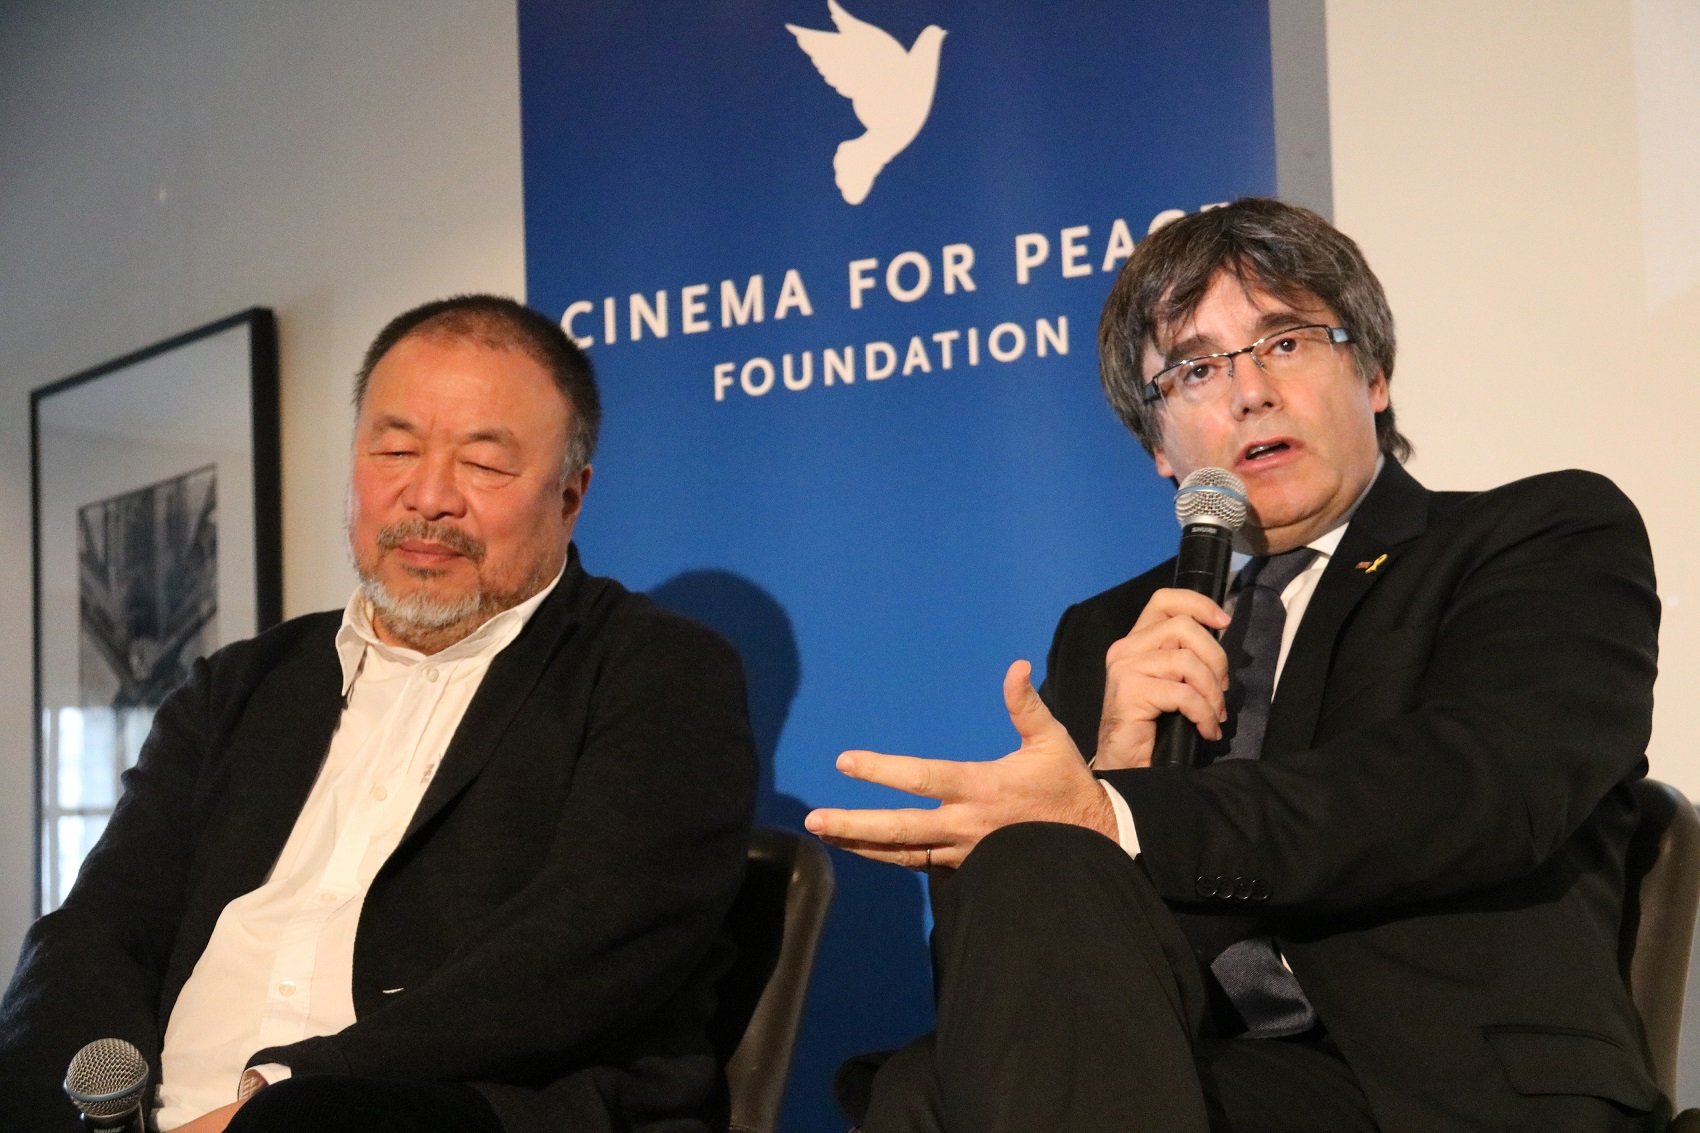 Puigdemont and Ai Weiwei denounce Europe's "double standards" on human rights